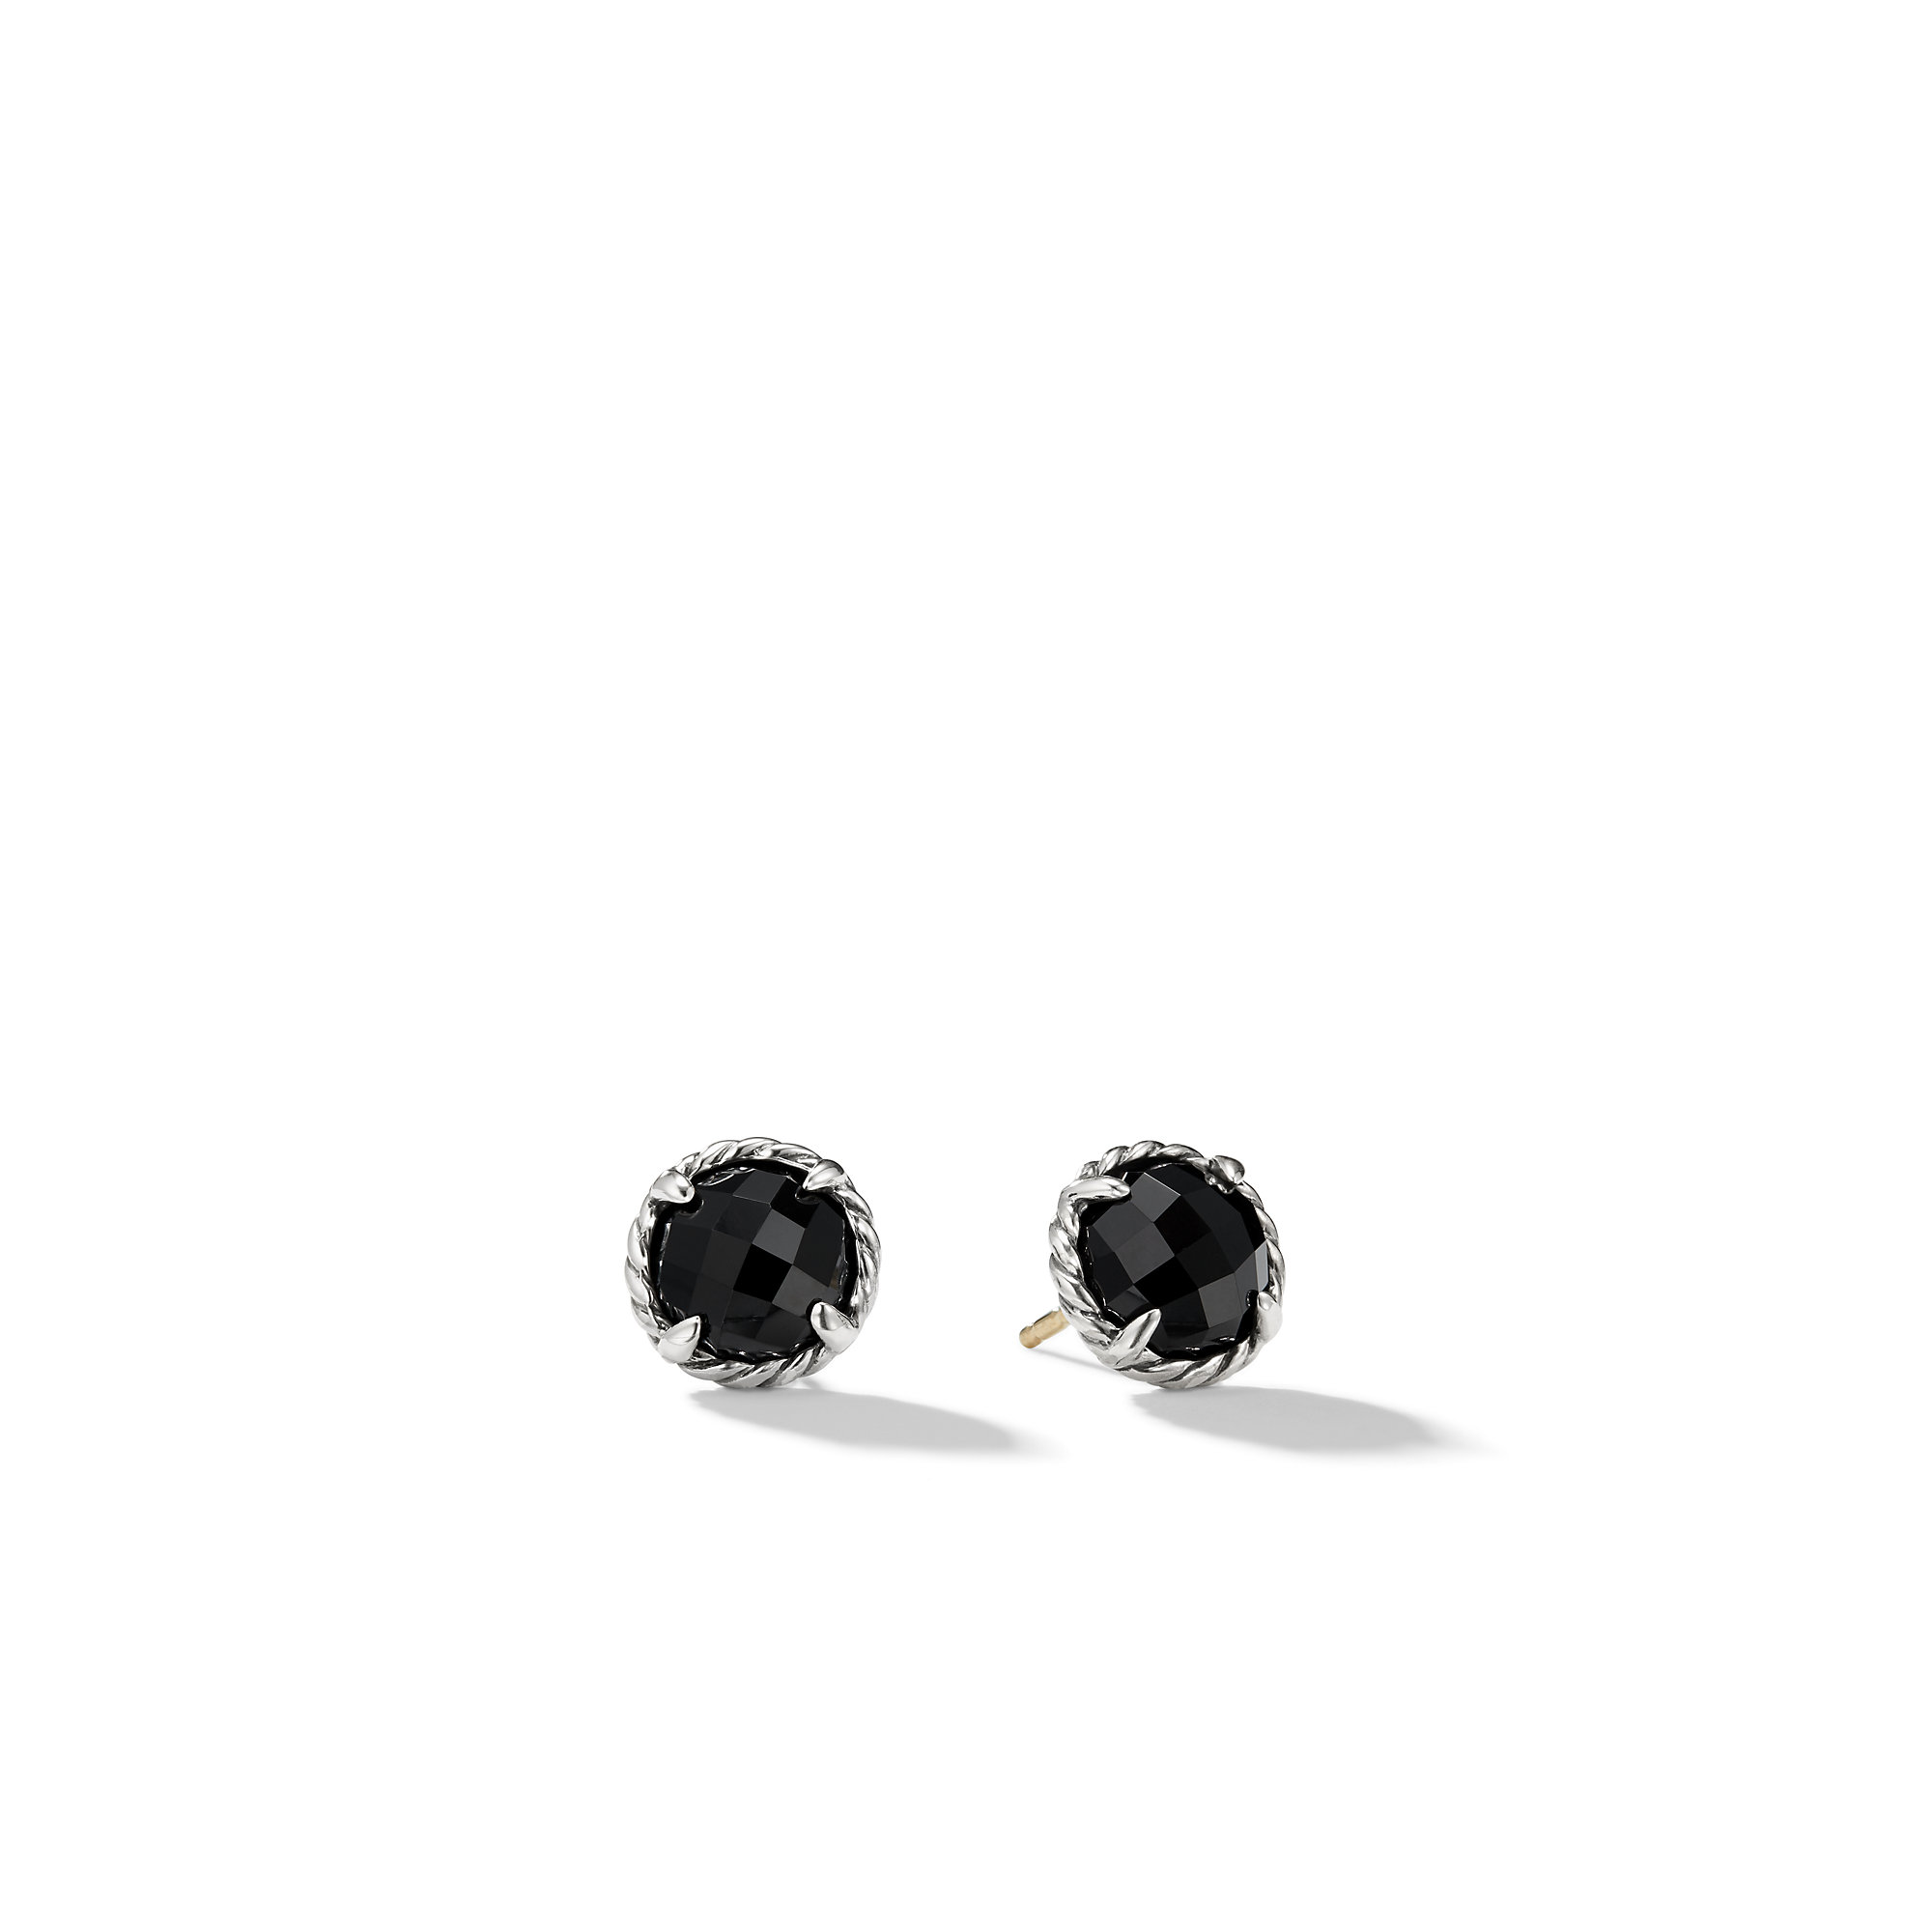 Petite Chatelaine® Stud Earrings in Sterling Silver with Black Onyx